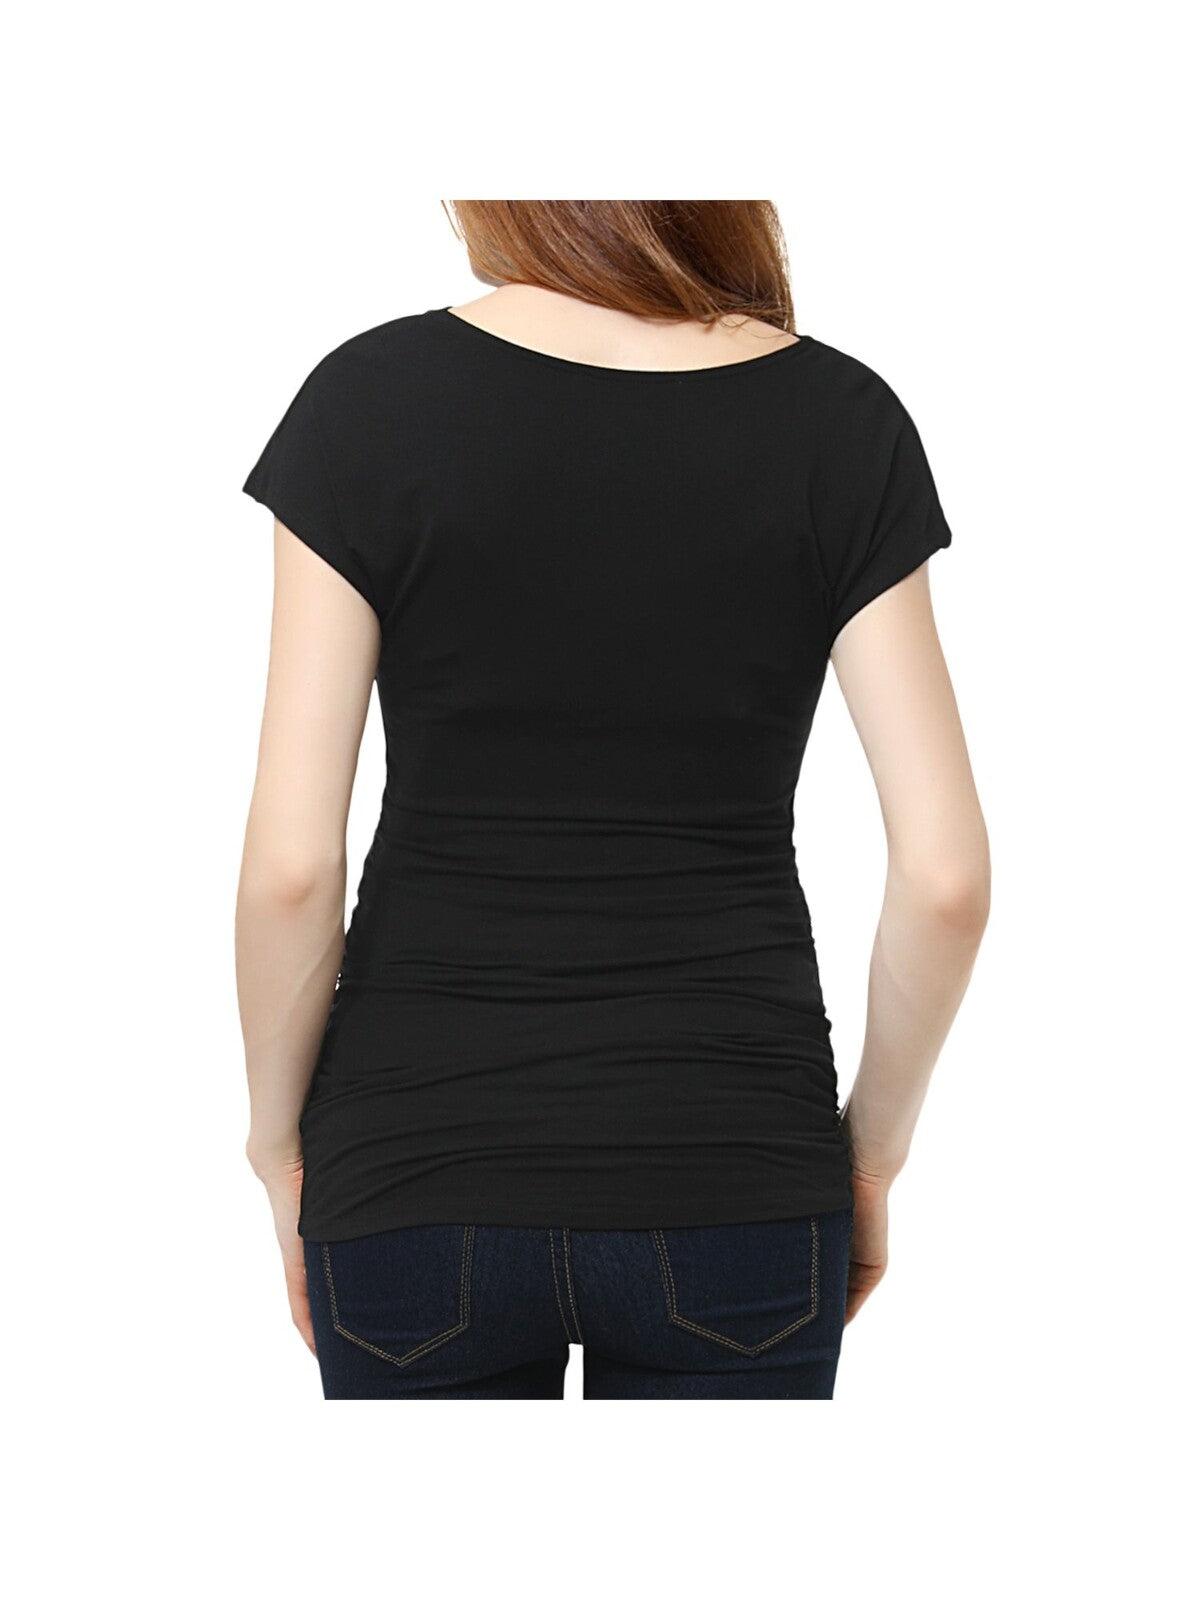 KIMI & KAI Womens Black Stretch Ruched Curved Hem Short Sleeve Cowl Neck Top Maternity S